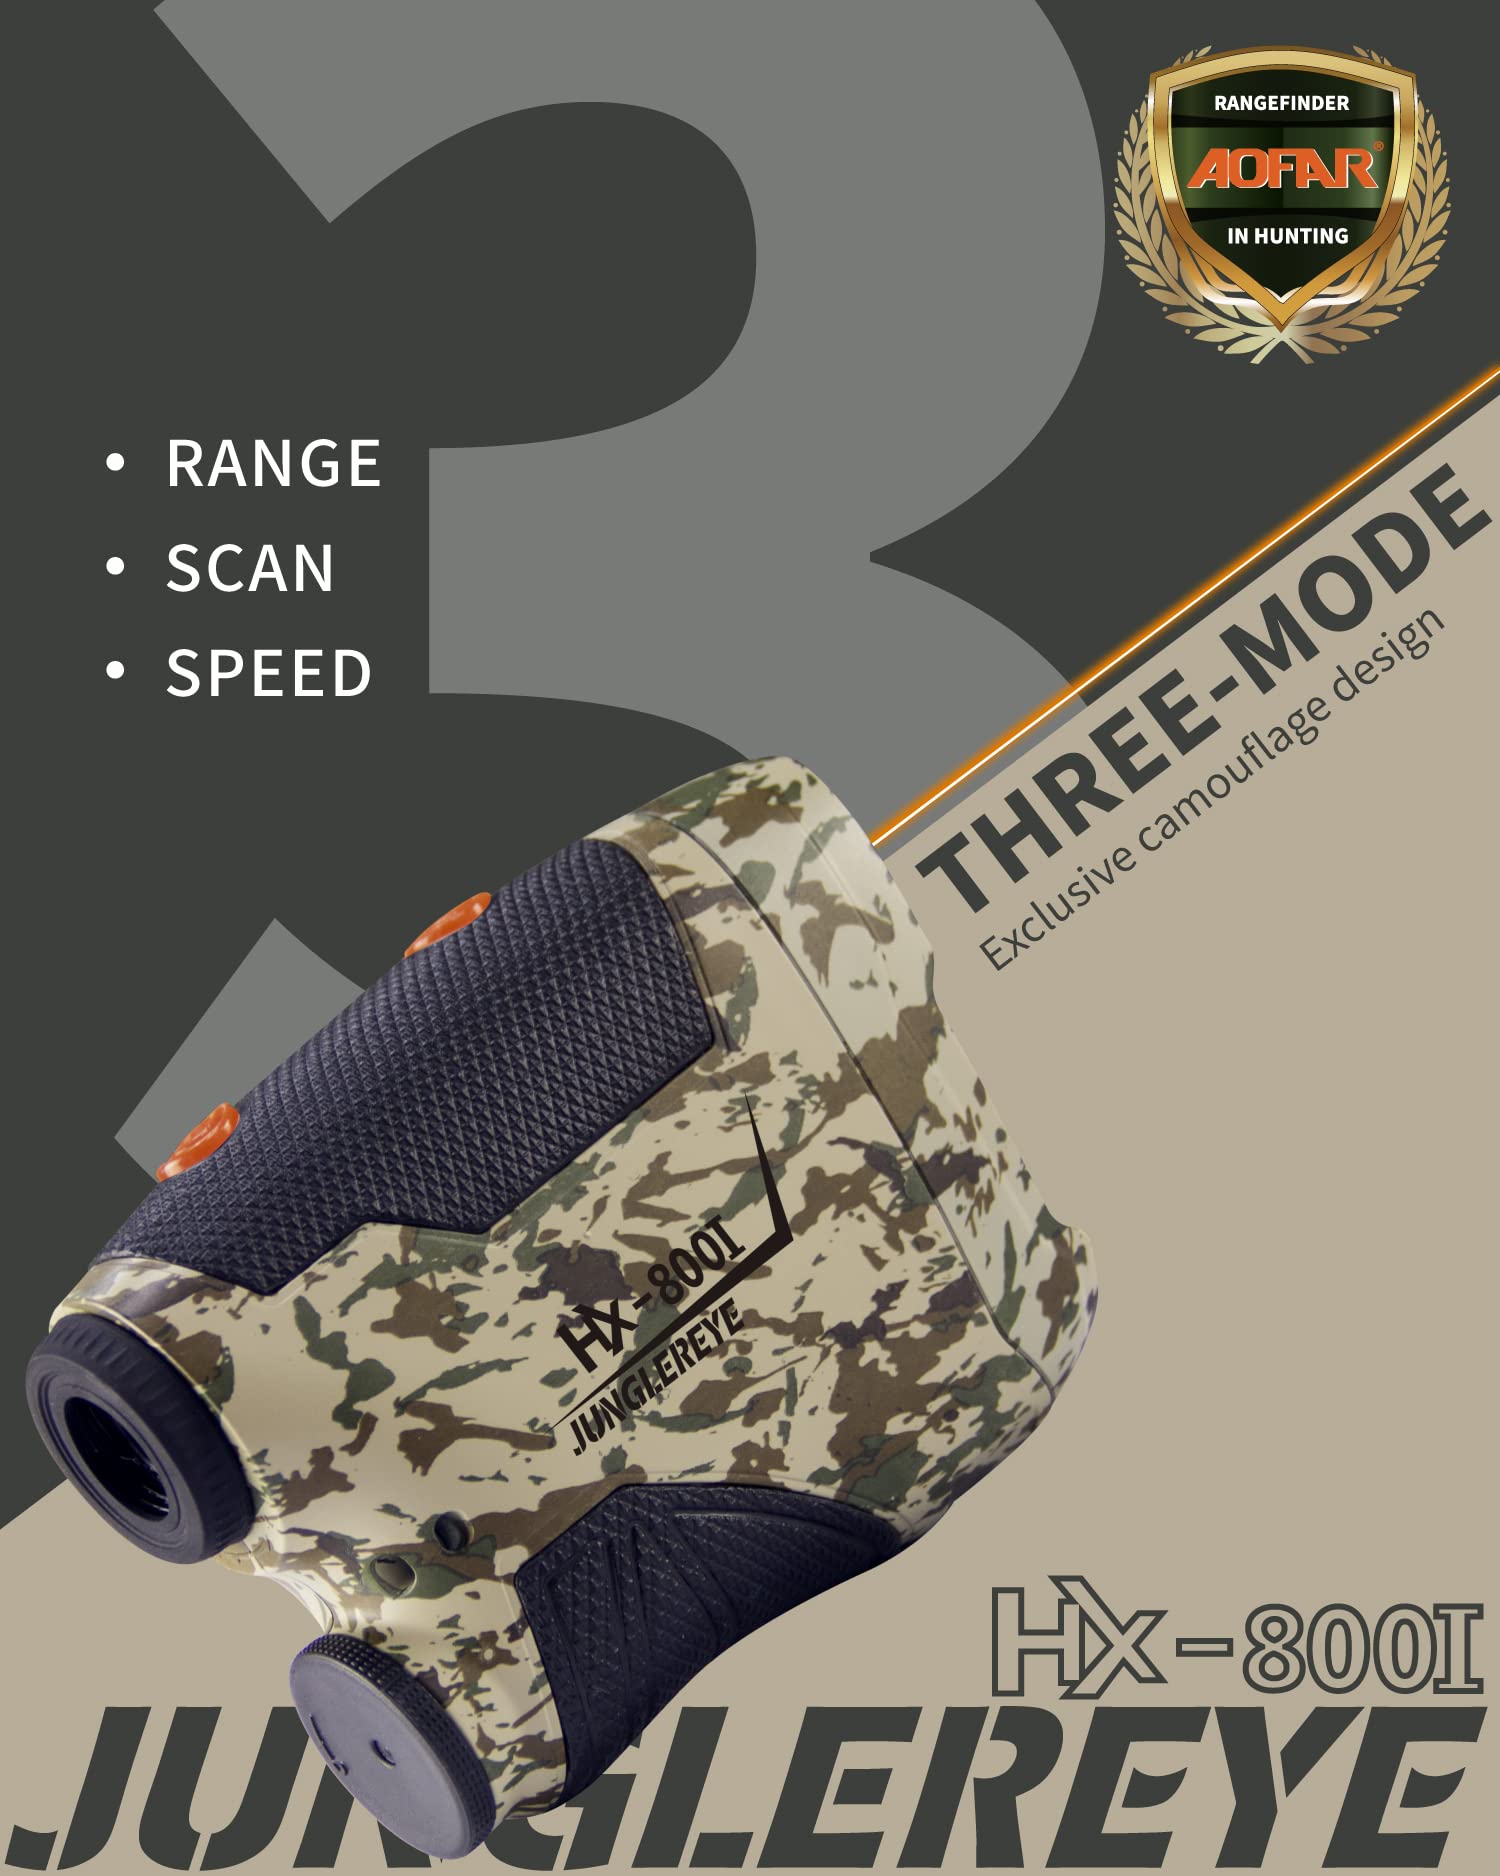 AOFAR HX-700N Hunting Range Finder 700 Yards Waterproof Archery Rangefinder  for Bow Hunting with Range and Speed Mode, Free Battery, Carrying Case